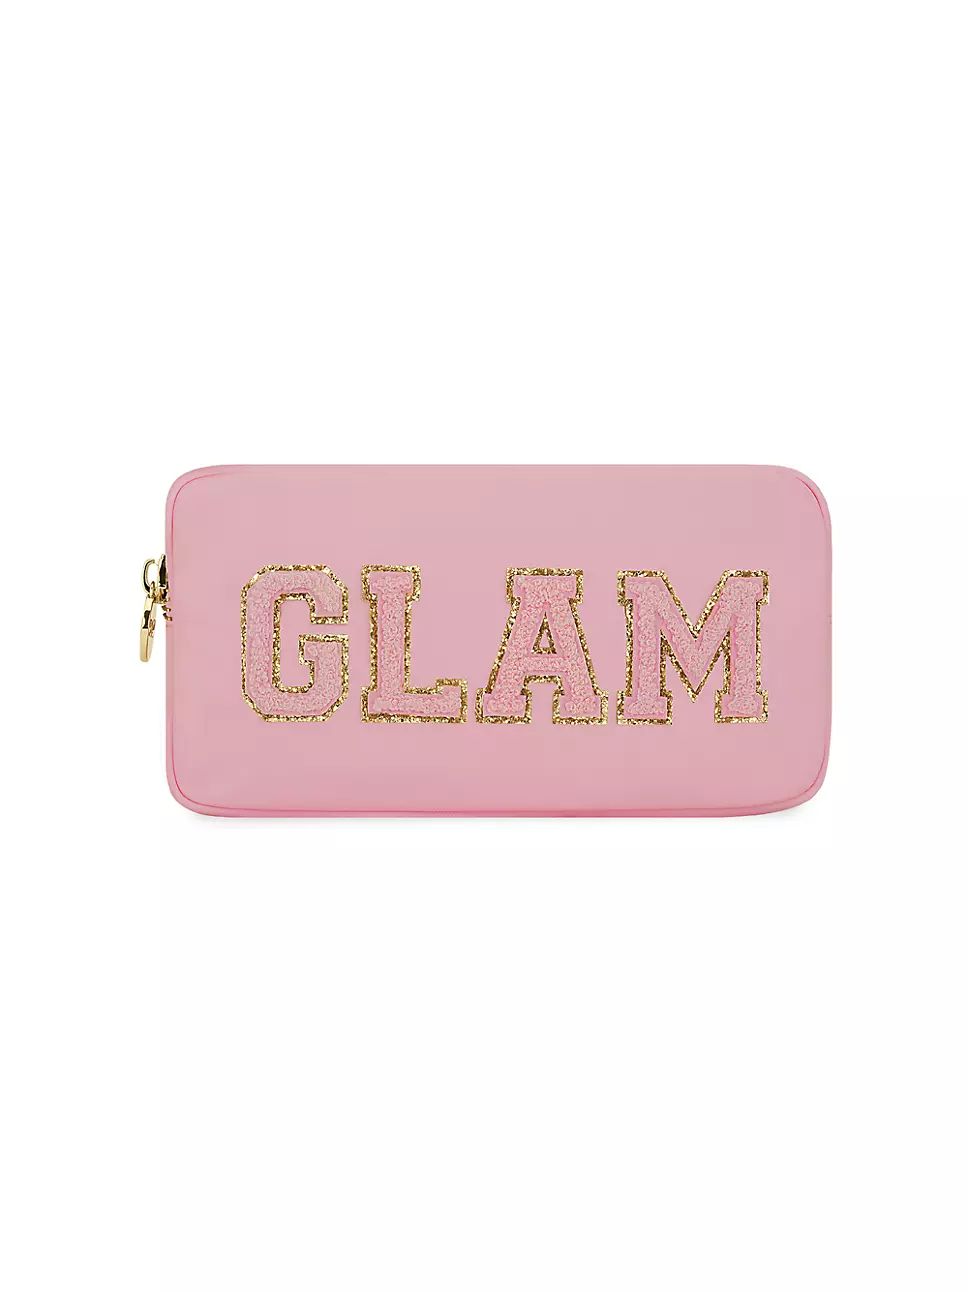 Stoney Clover Lane Small Glam Zippered Pouch | Saks Fifth Avenue